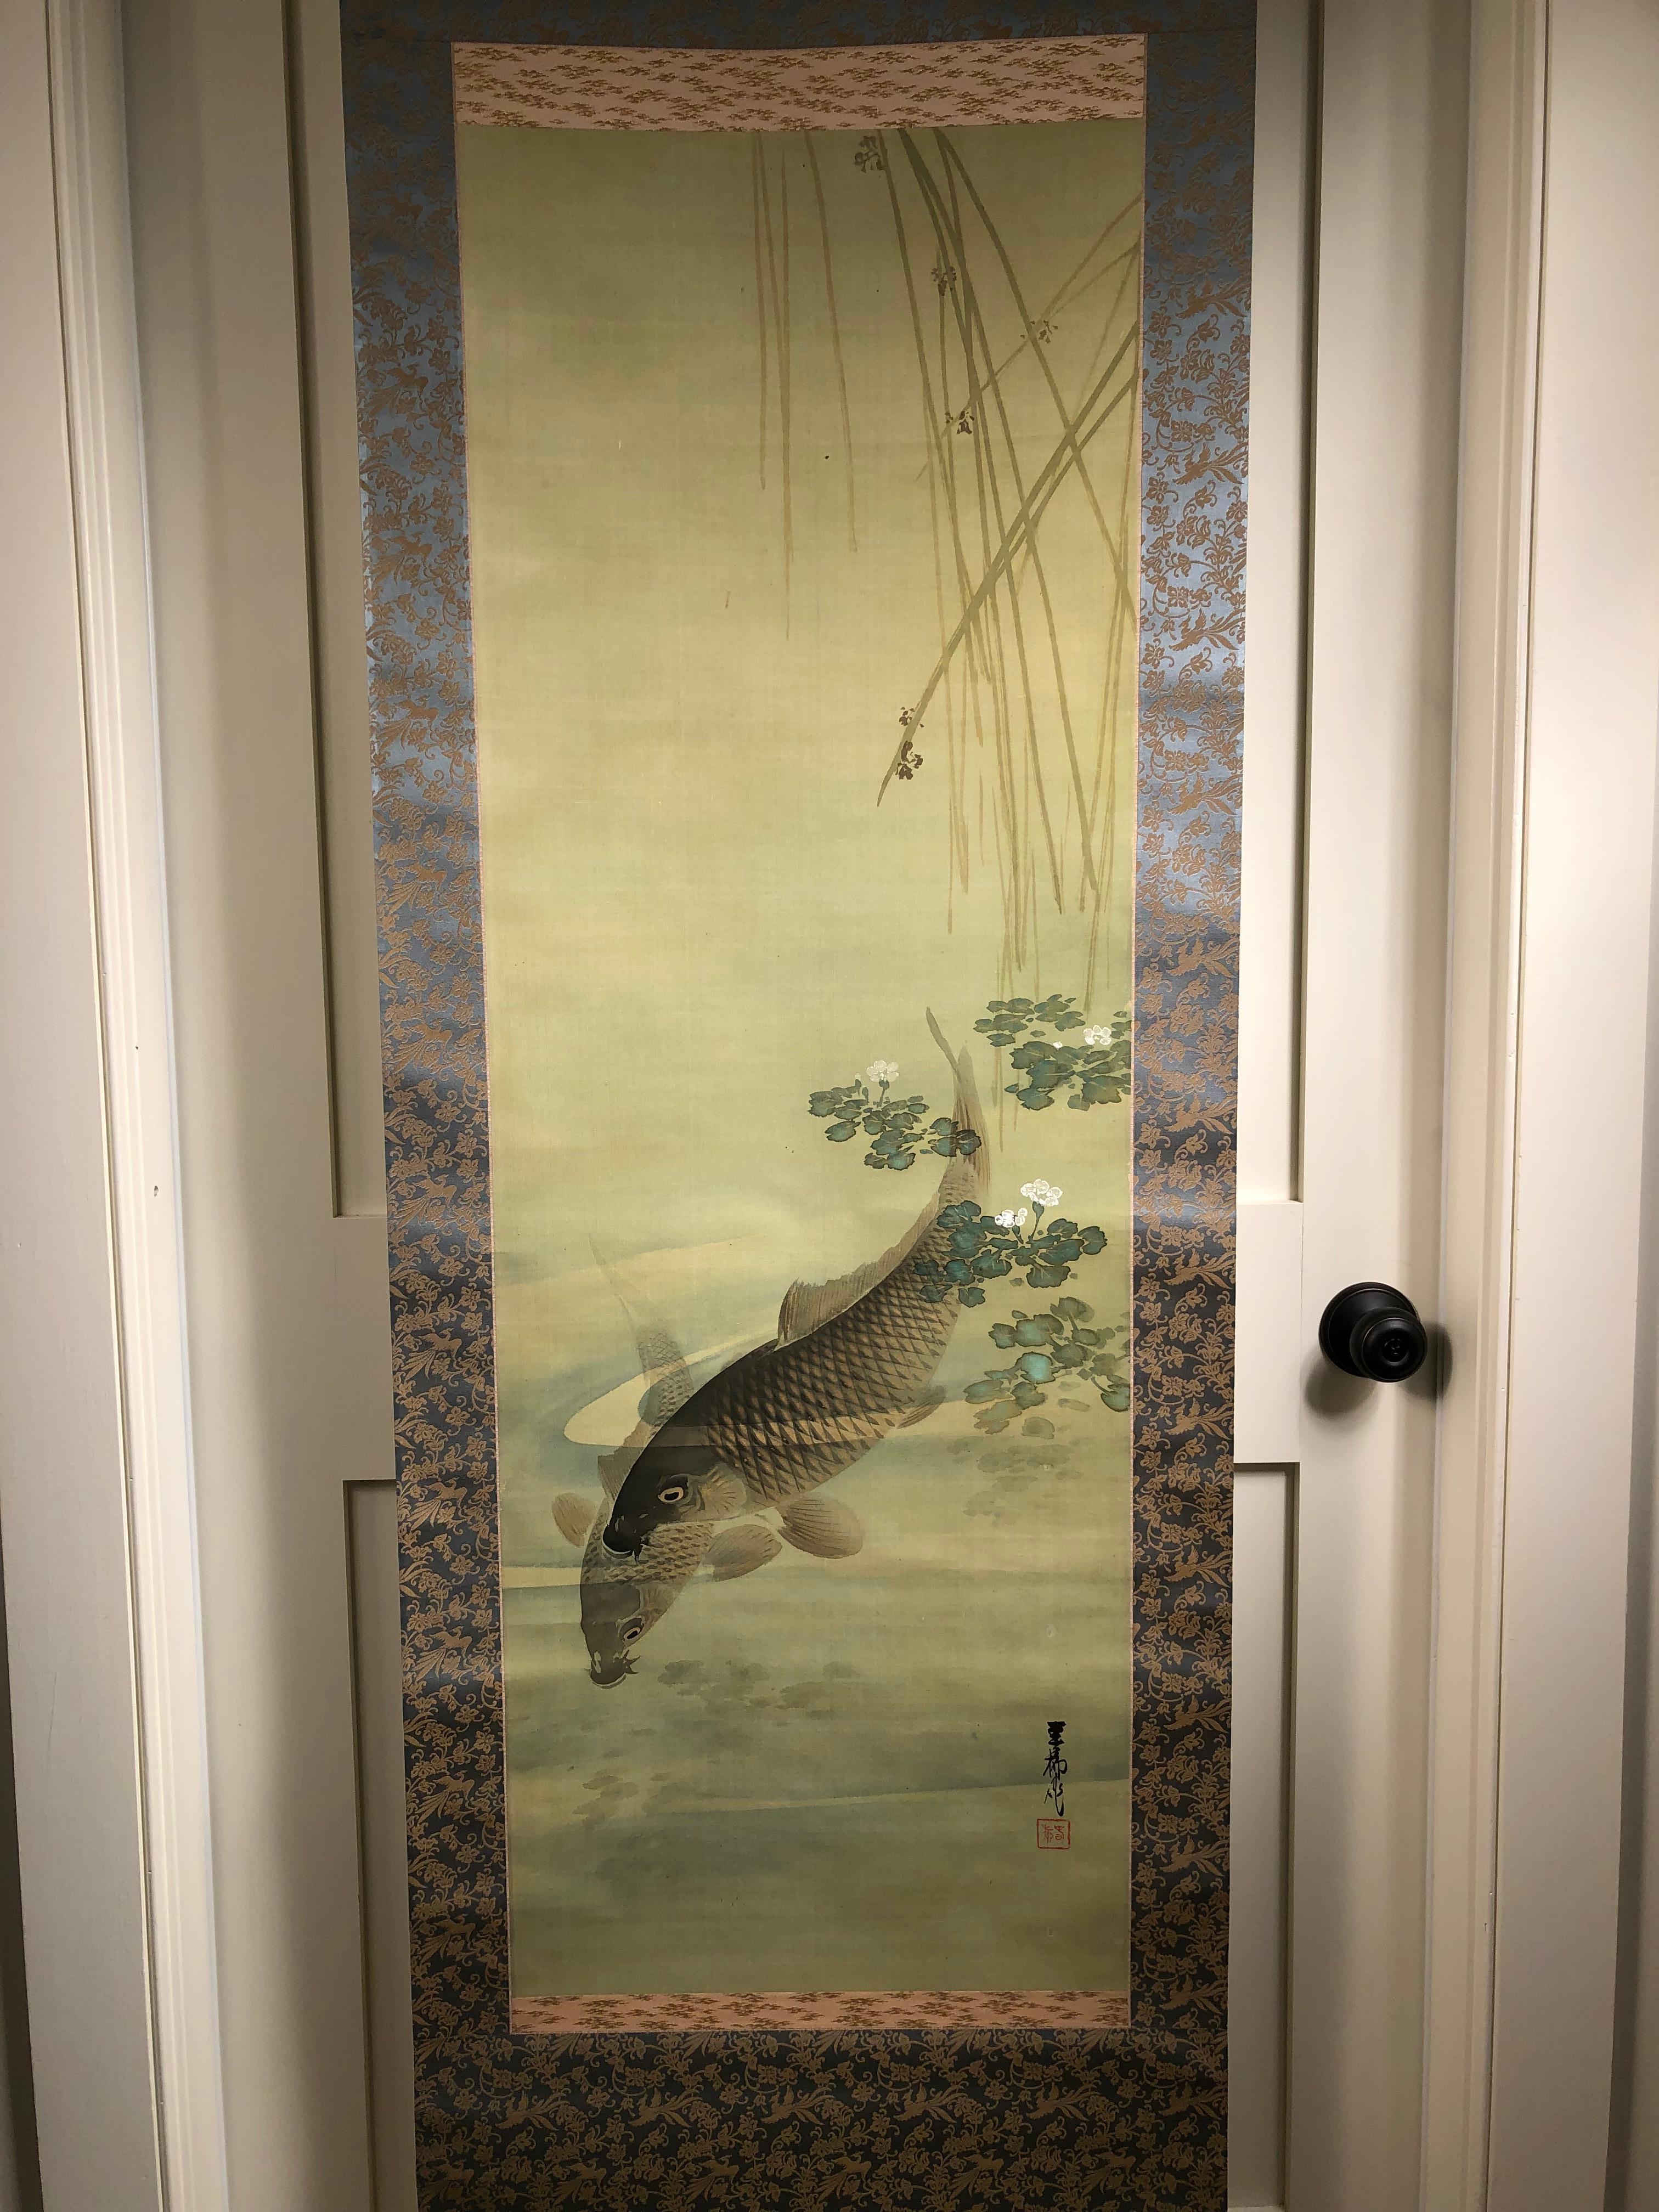 Japan, a brilliant hand painting on silk by Shunryu Wada of a koi and its shadow immersed just below gracefully floating lily pads on shallow surface. A refreshing design concept and delightful work of wall art. Signed and sealed by artist.